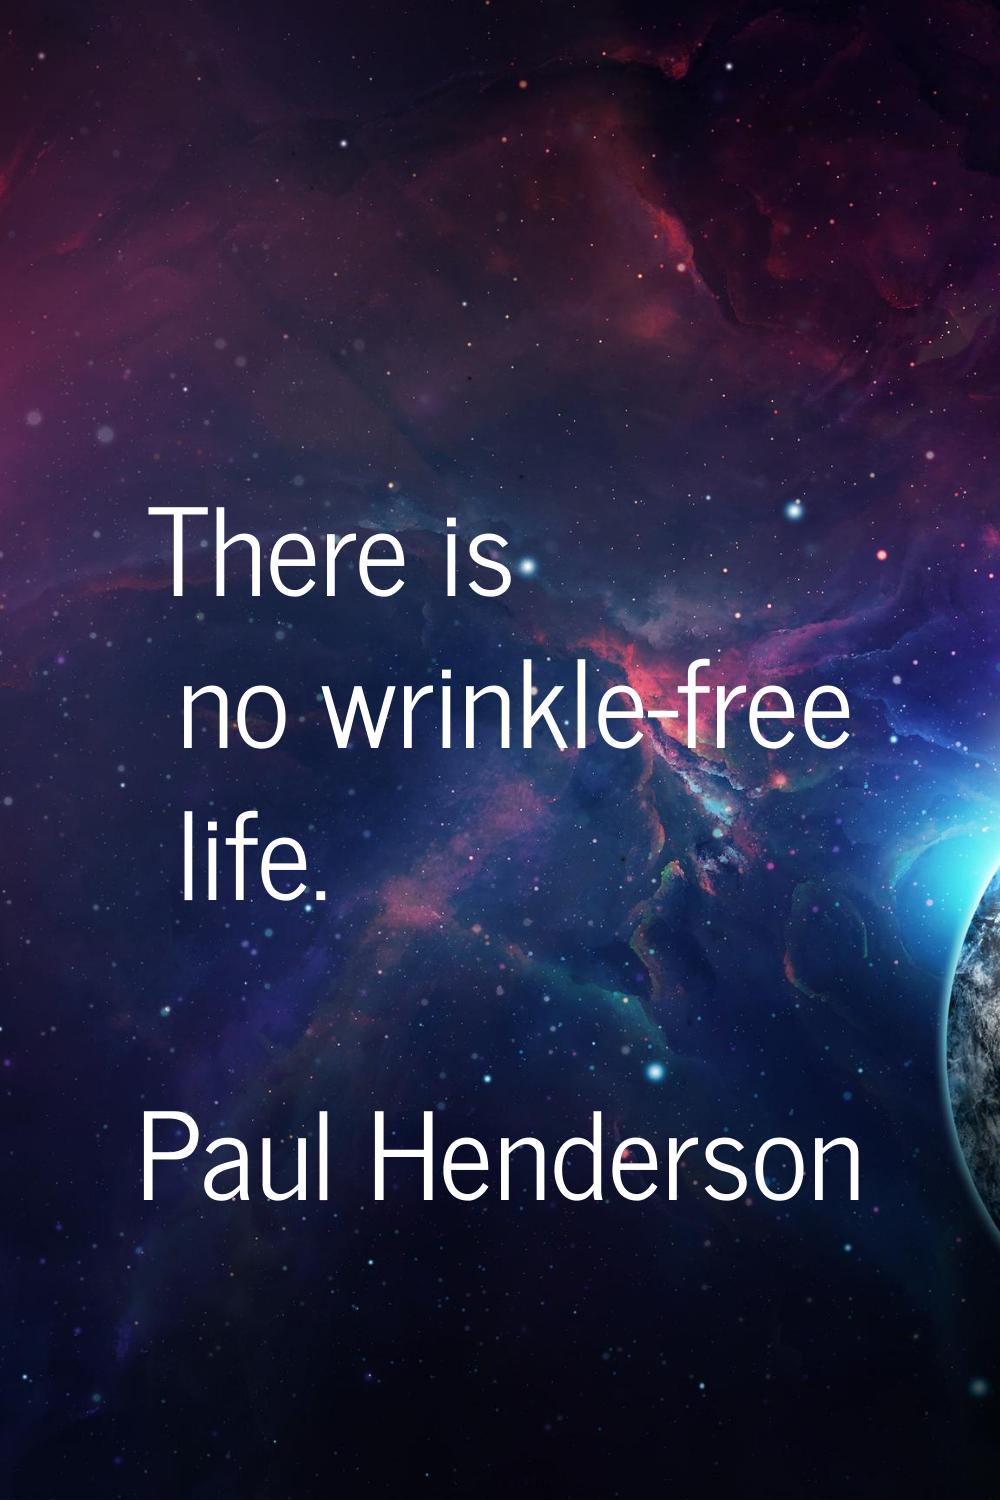 There is no wrinkle-free life.